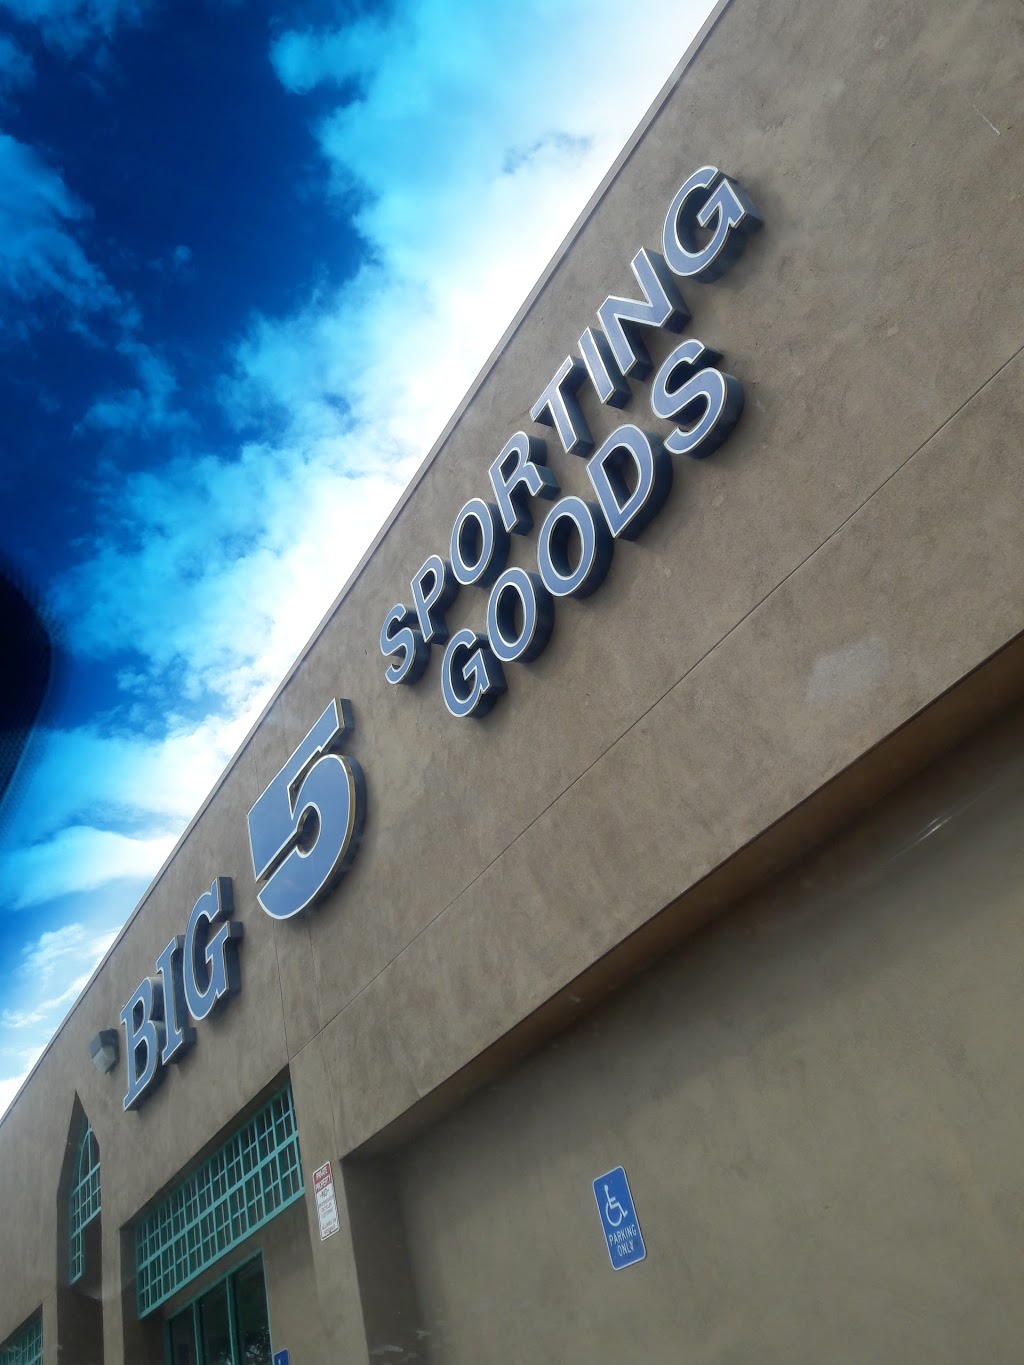 Big 5 Sporting Goods | 9391 Coors Blvd NW, Albuquerque, NM 87114 | Phone: (505) 890-5121